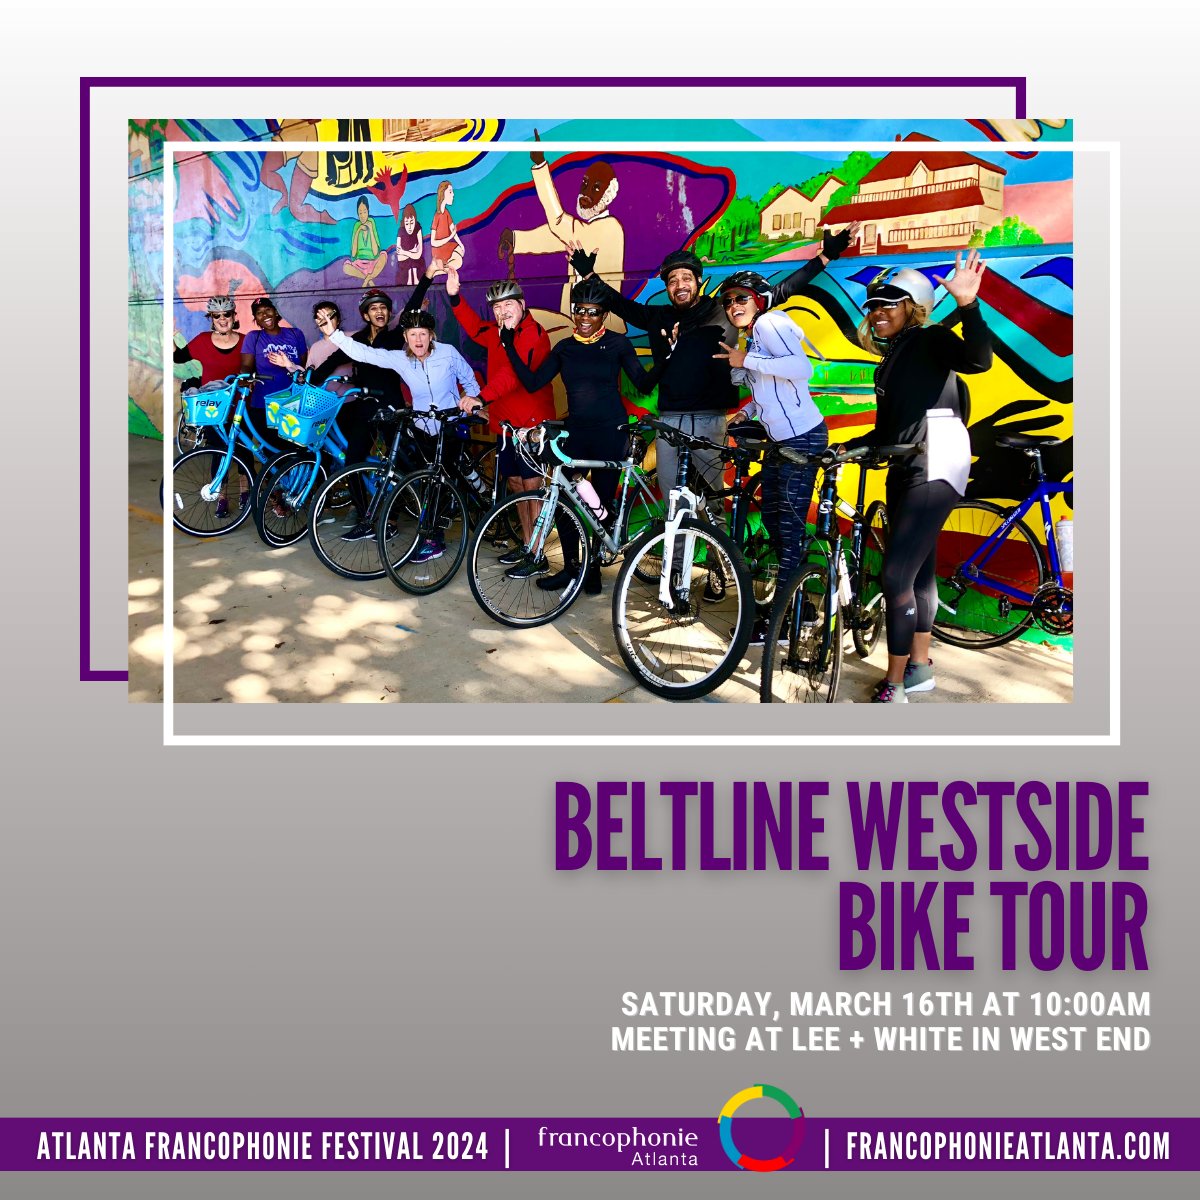 Join the Swiss and Belgian Francophonie community for a fun bike tour of the Atlanta Beltline Westside on Sat. March 16! For more details & to register go to @francophonieatl 🇨🇭🚲🇧🇪